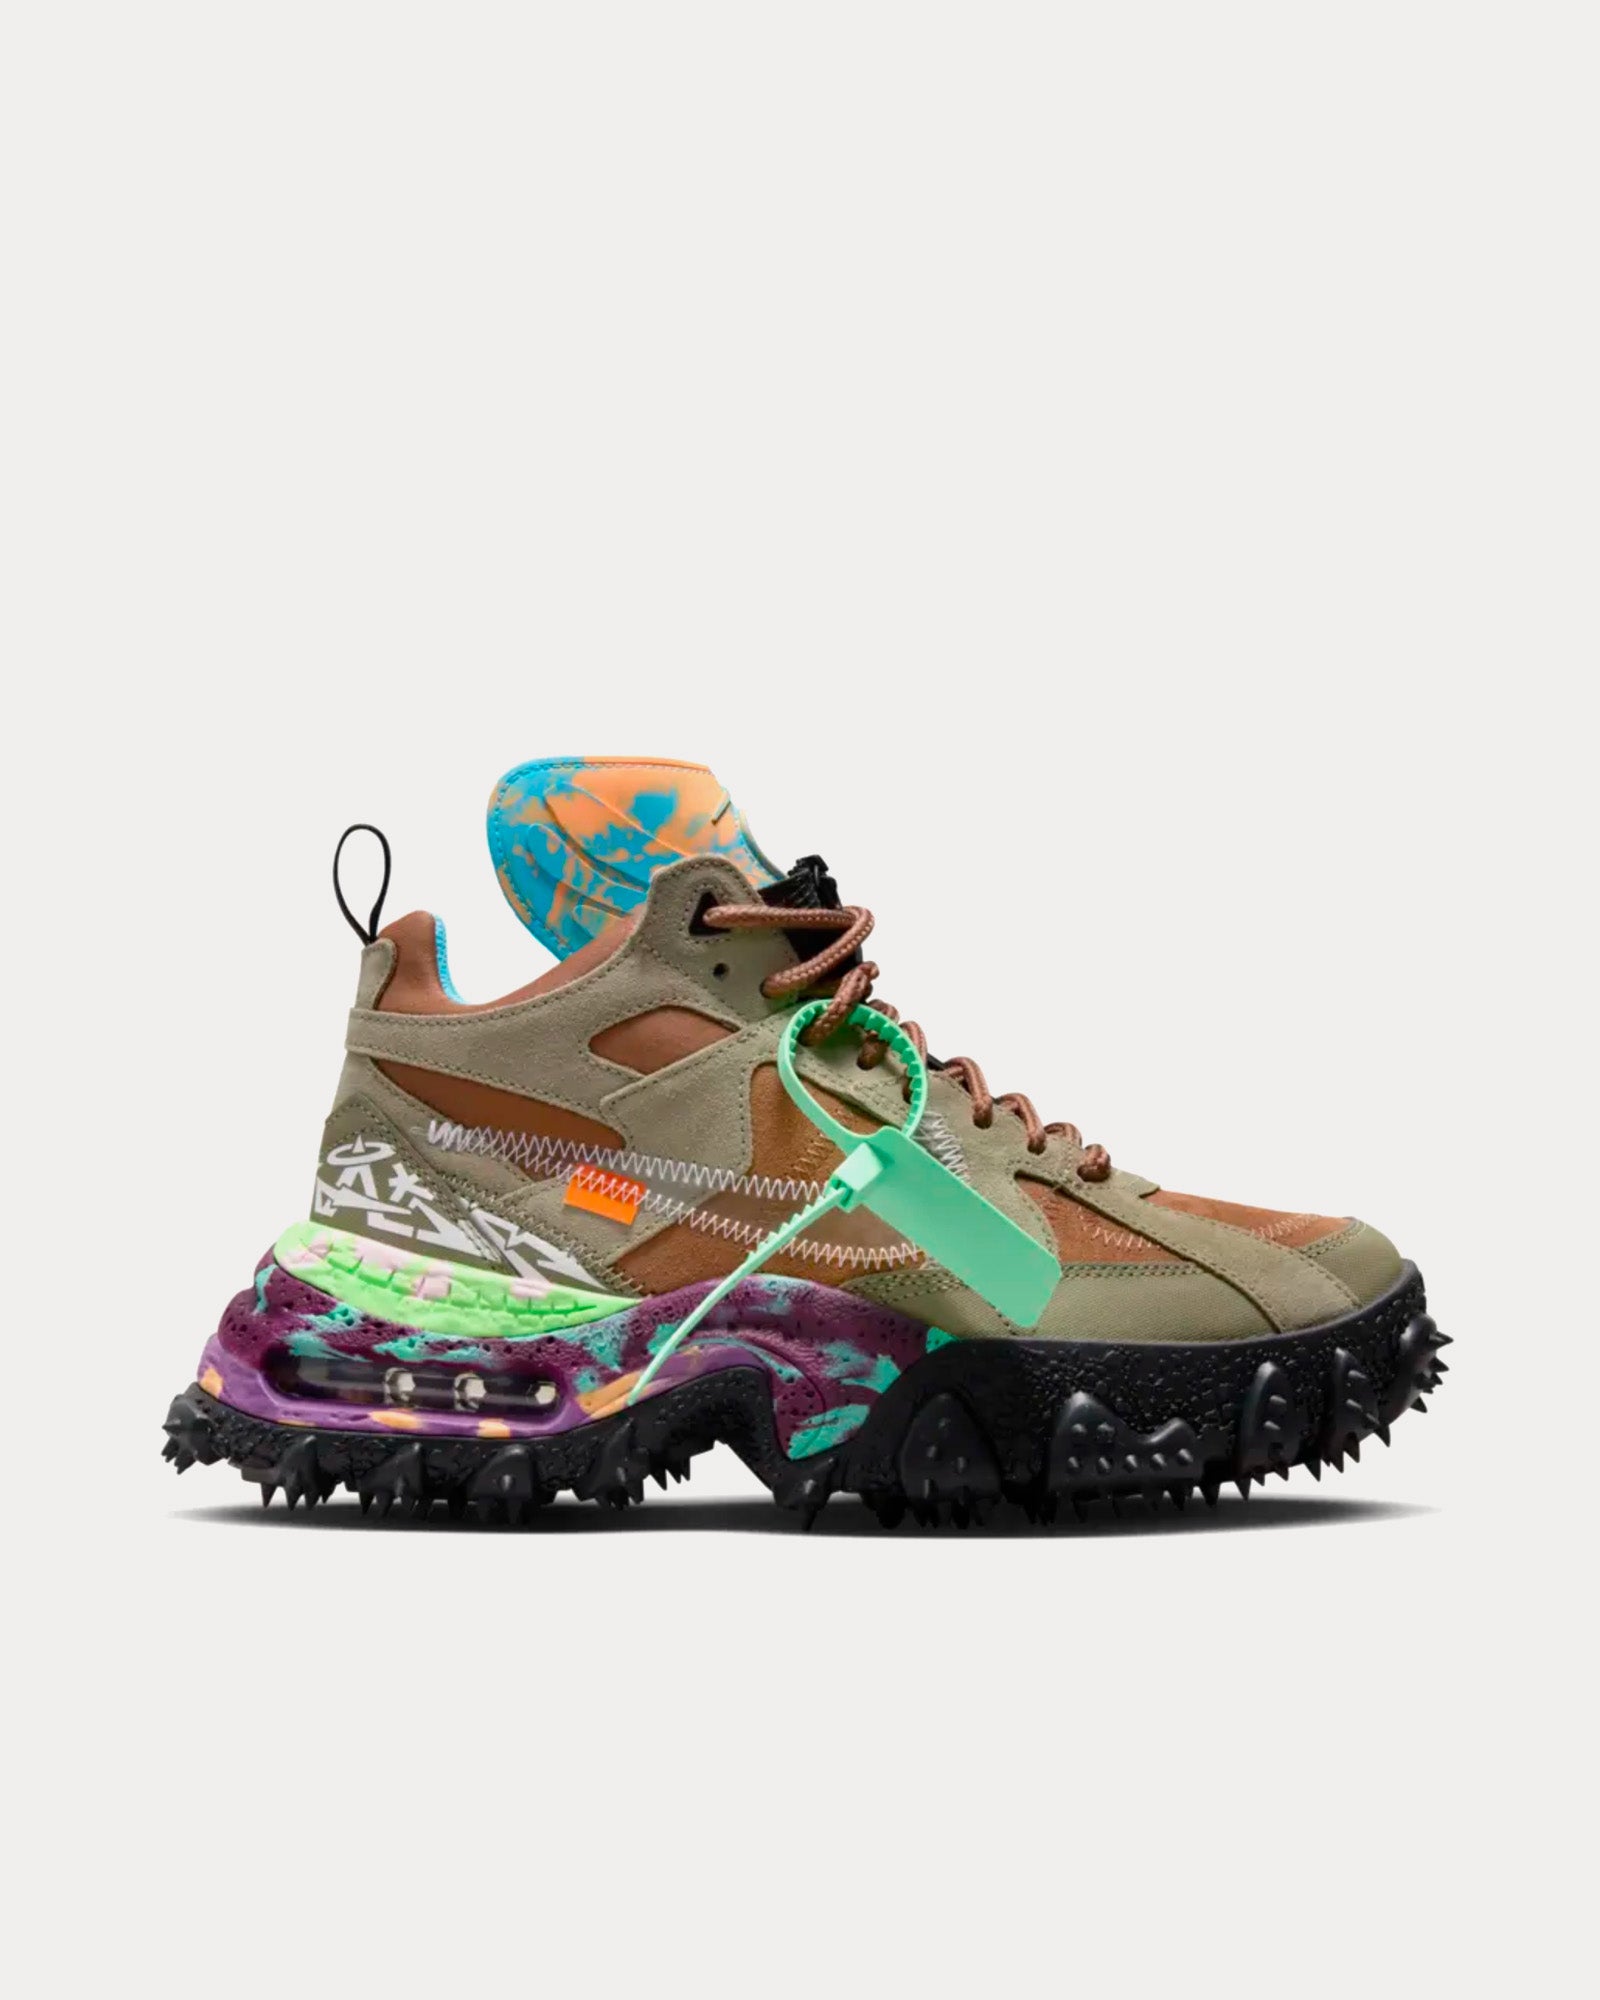 Nike x Off-White - Terra Forma Matte Olive Mid Top Sneakers